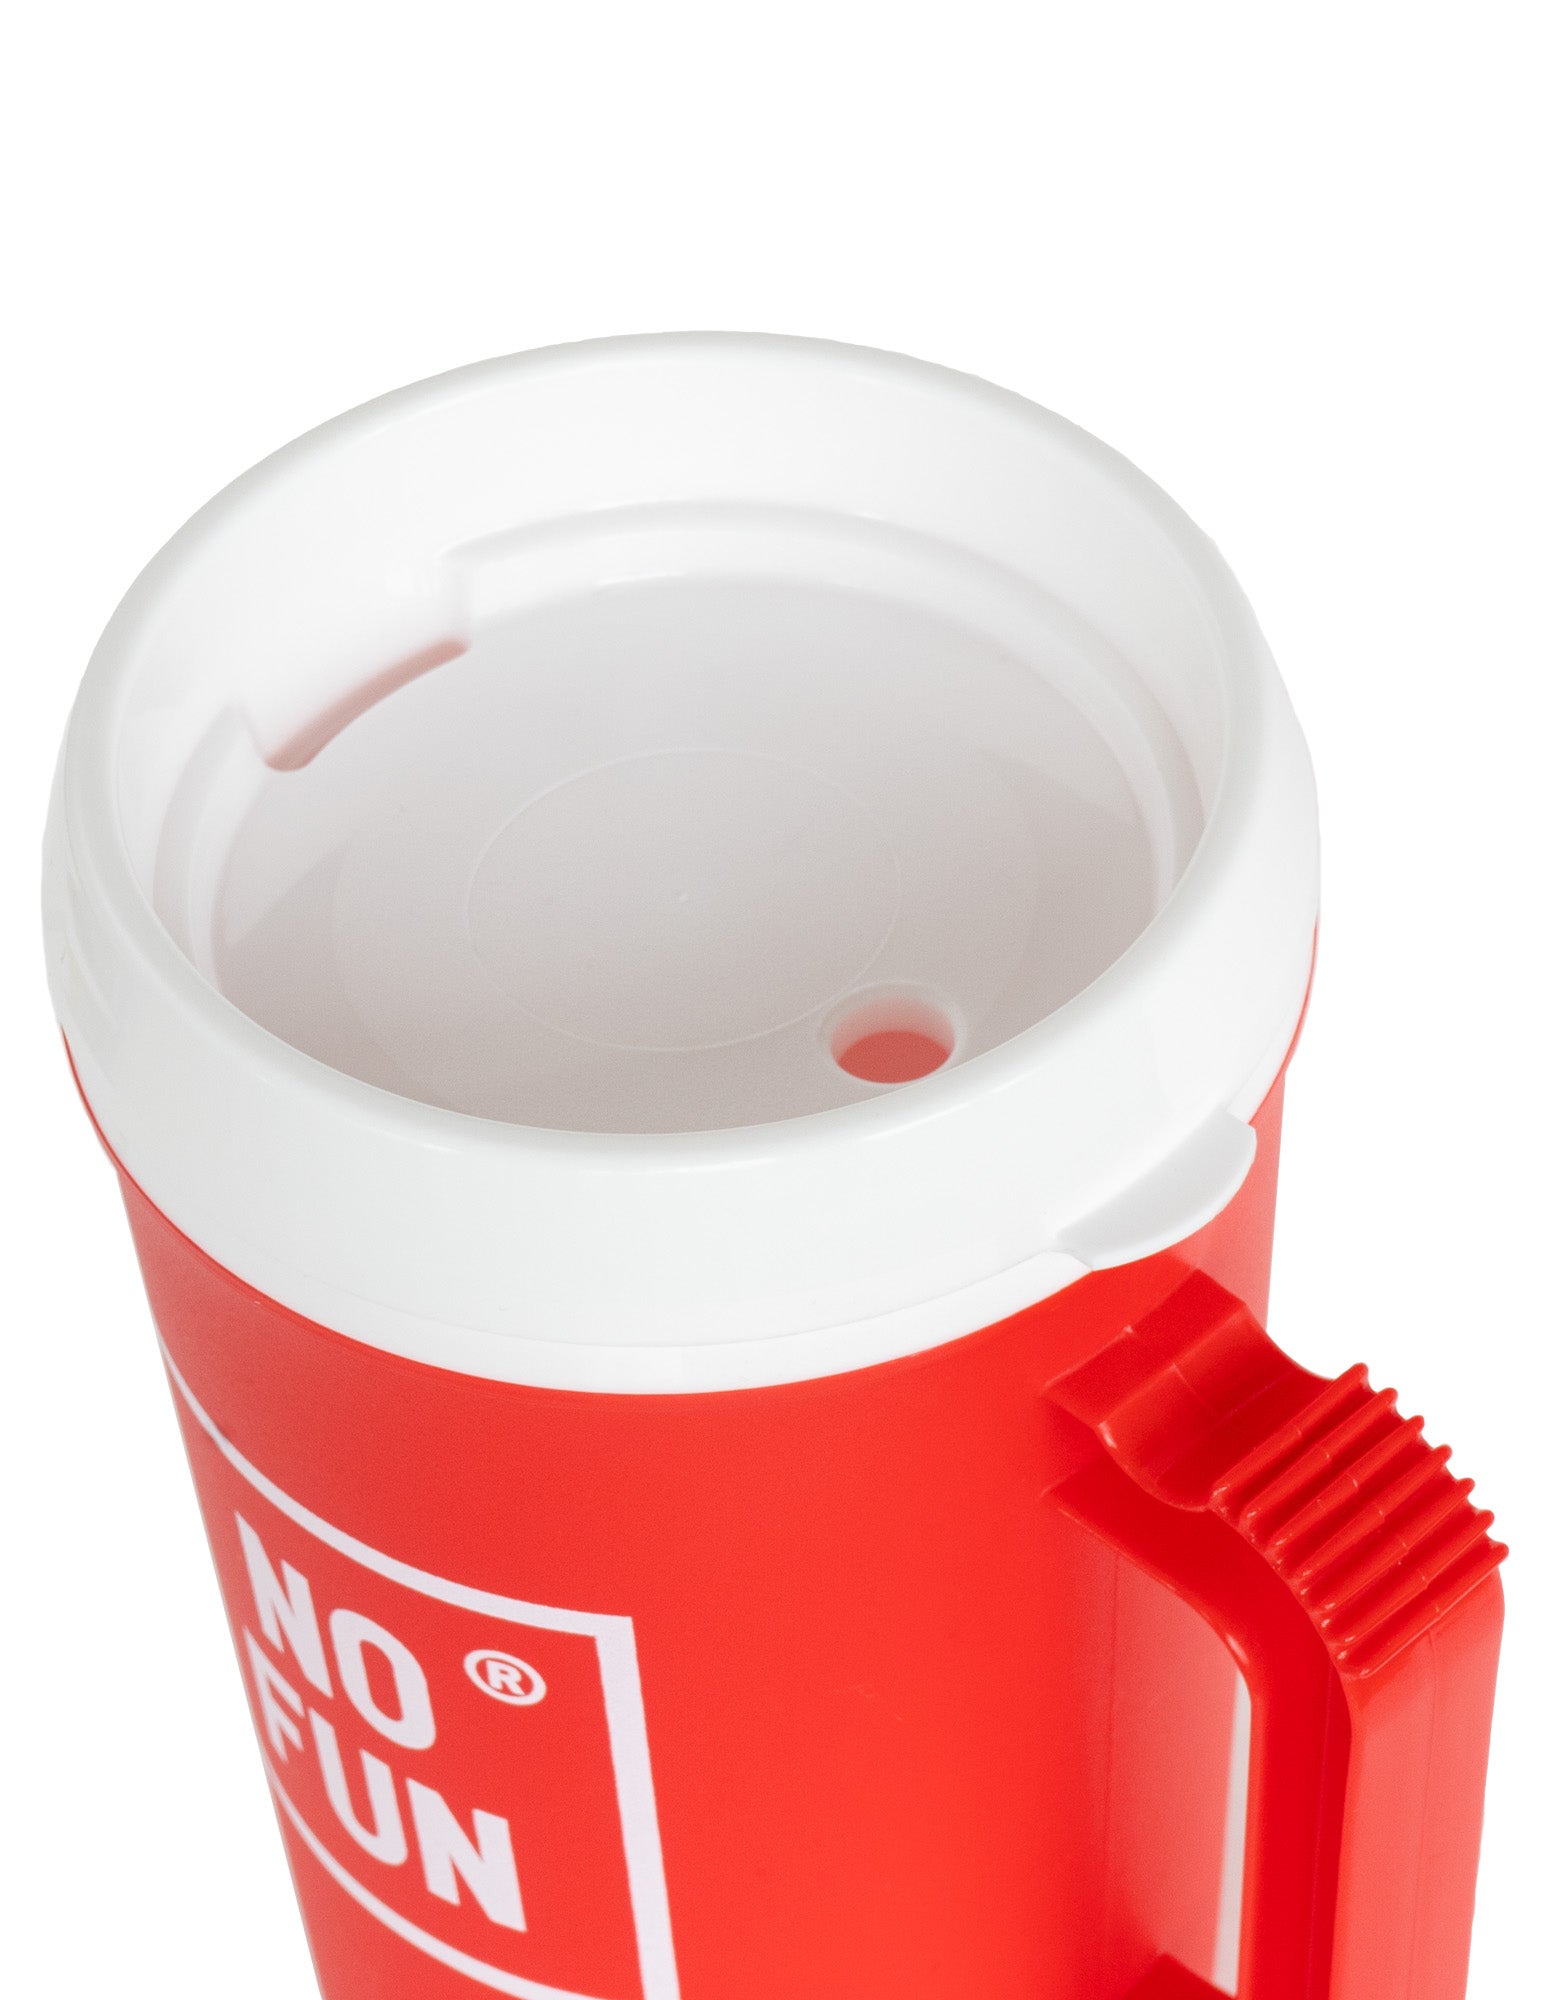 "Big Sipper" Mug by No Fun® in the colour red.  The image is a close up view of the lid which is white.  The lid features a hole for a straw, as well as a small opening for drinking.  The handle can be seen in the photo, as well as the square "No Fun®" logo that is printed in white.